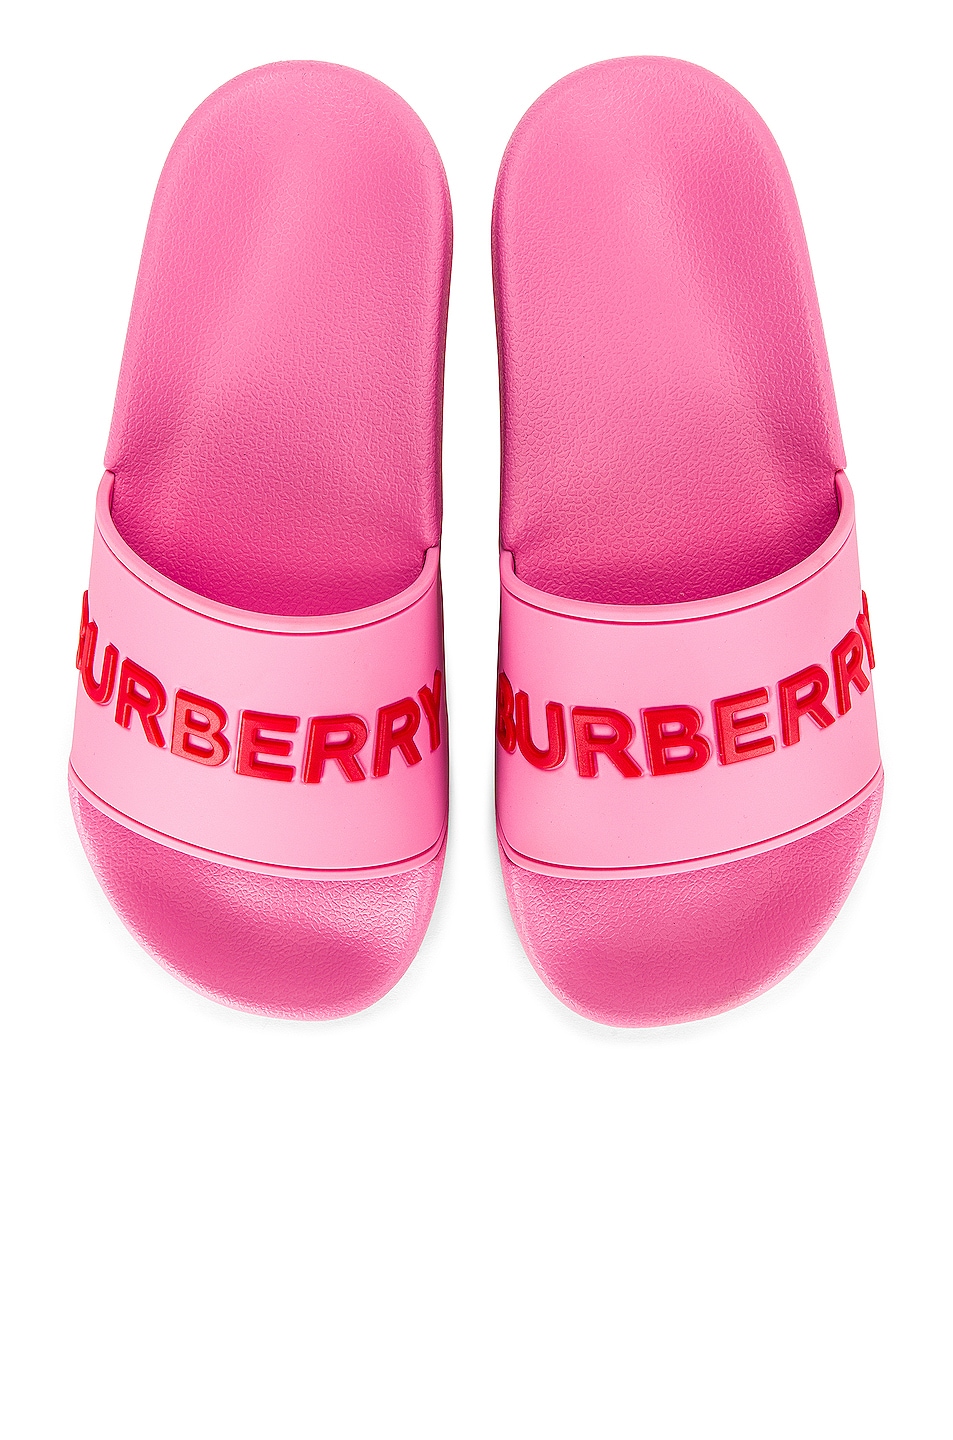 Image 1 of Burberry Furley Text Slides in Bubble Gum Pink